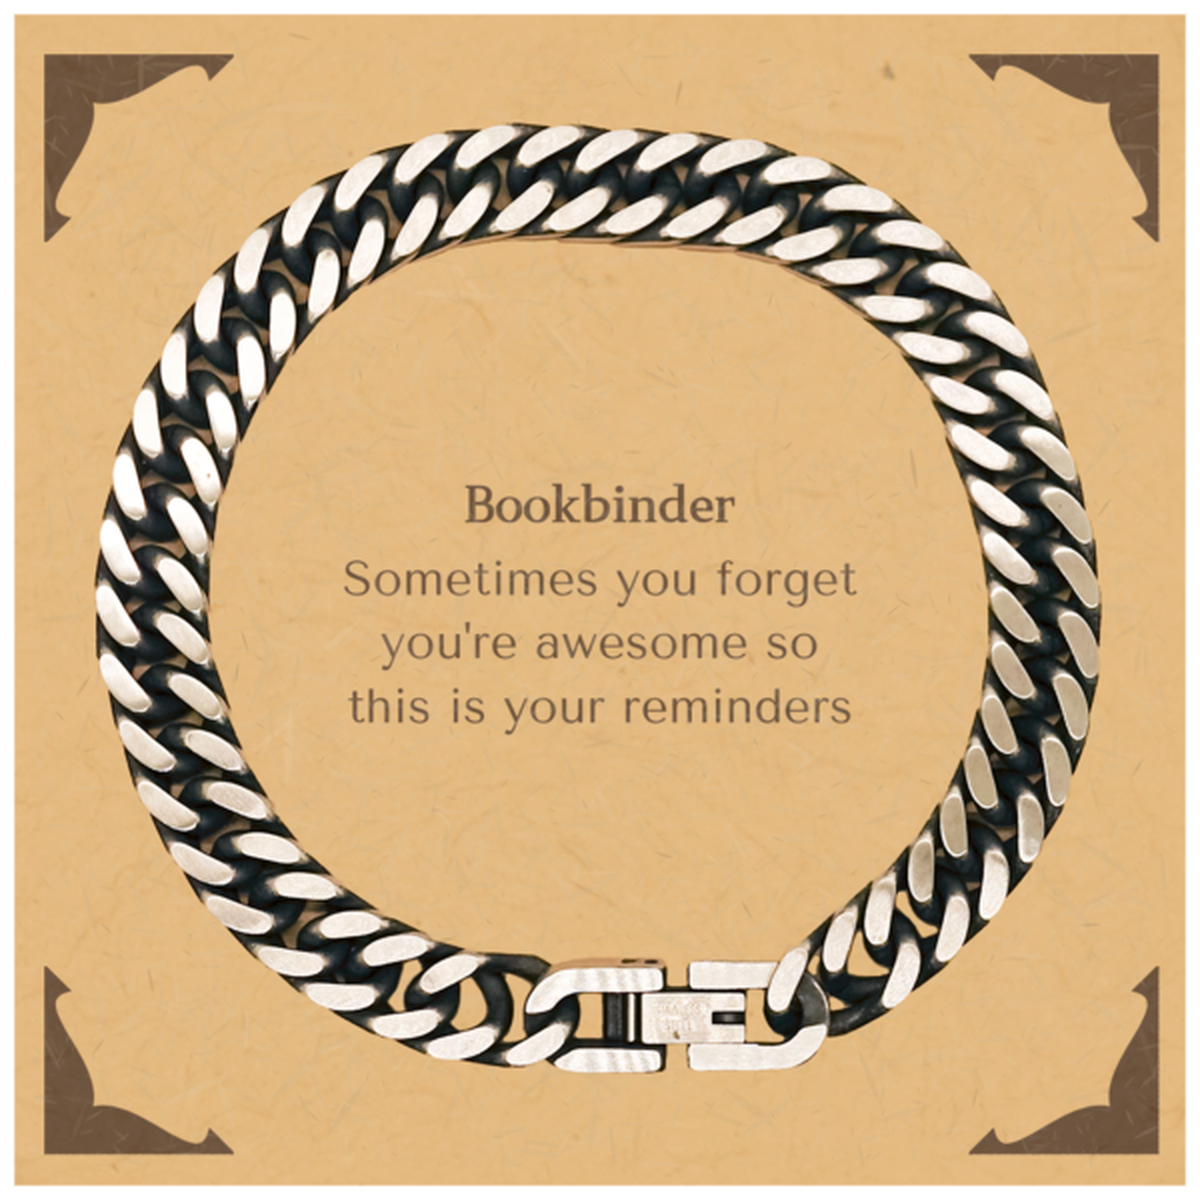 Sentimental Bookbinder Cuban Link Chain Bracelet, Bookbinder Sometimes you forget you're awesome so this is your reminders, Graduation Christmas Birthday Gifts for Bookbinder, Men, Women, Coworkers